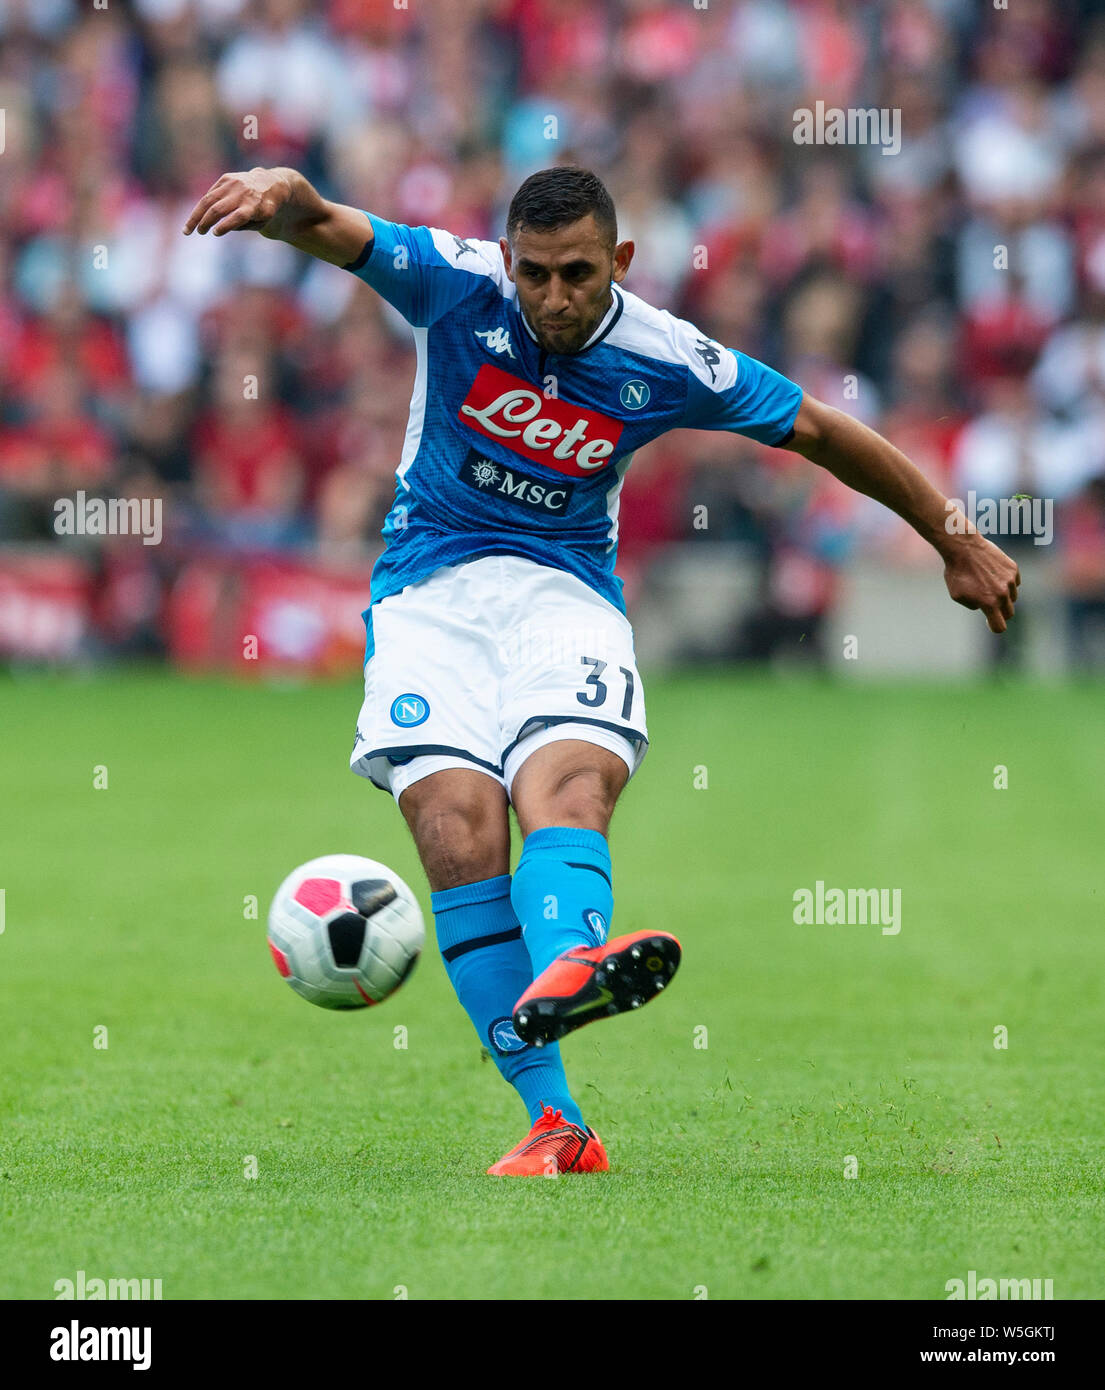 EDINBURGH, SCOTLAND - JULY 28:  Napoli Left-Back, Faouzi Ghoulam, shoots during the Pre-Season Friendly match between Liverpool FC and SSC Napoli at Murrayfield on July 28, 2019 in Edinburgh, Scotland. (Photo by MB Media) Stock Photo